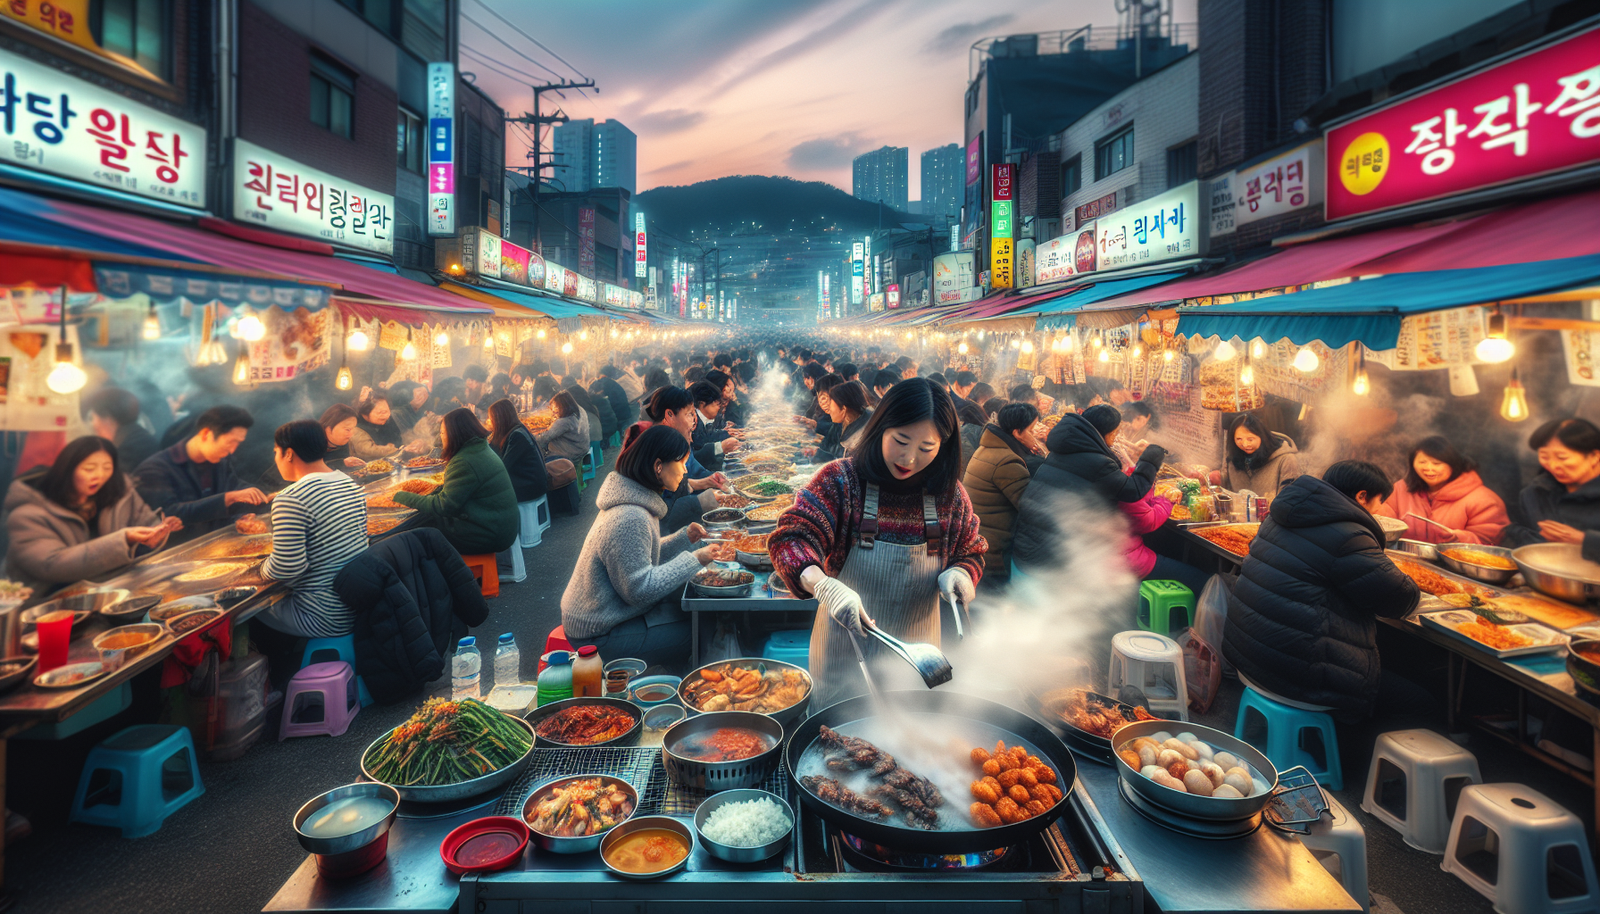 What Are Some Popular Street Food Dishes In Korea?